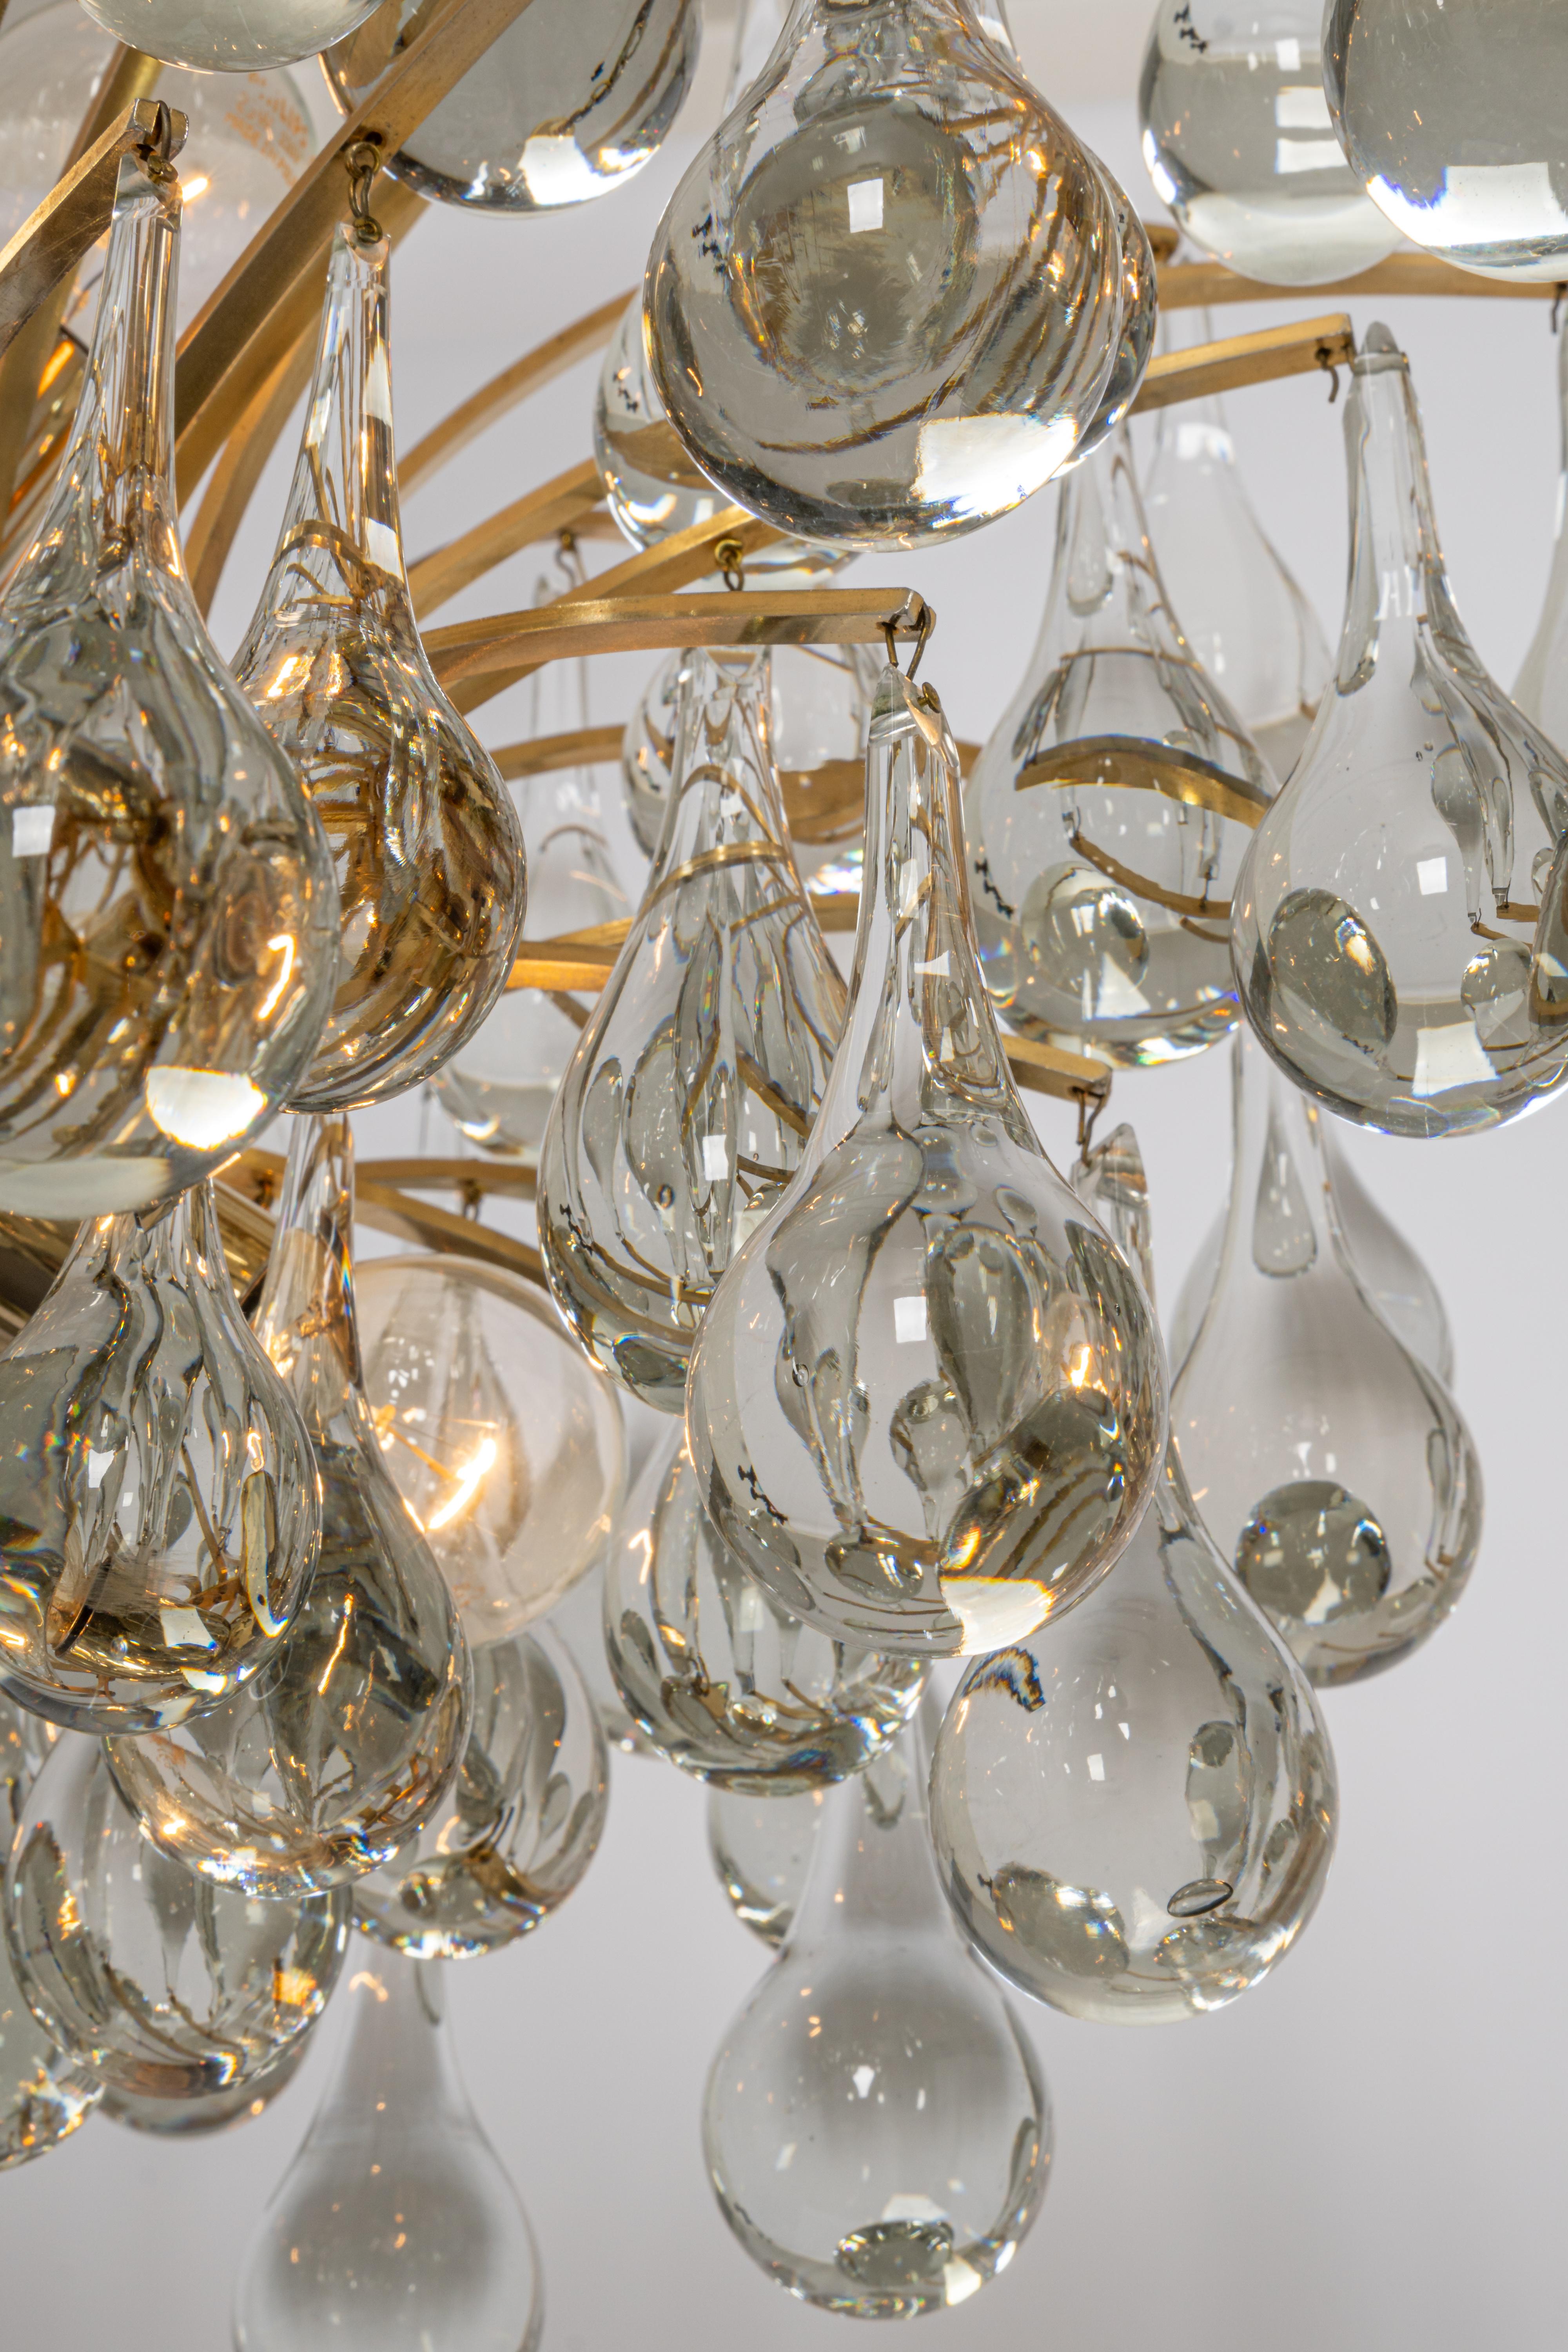 Brass 1 of 2 Large Murano Glass Tear Drop Chandelier, Christoph Palme, Germany, 1970s For Sale